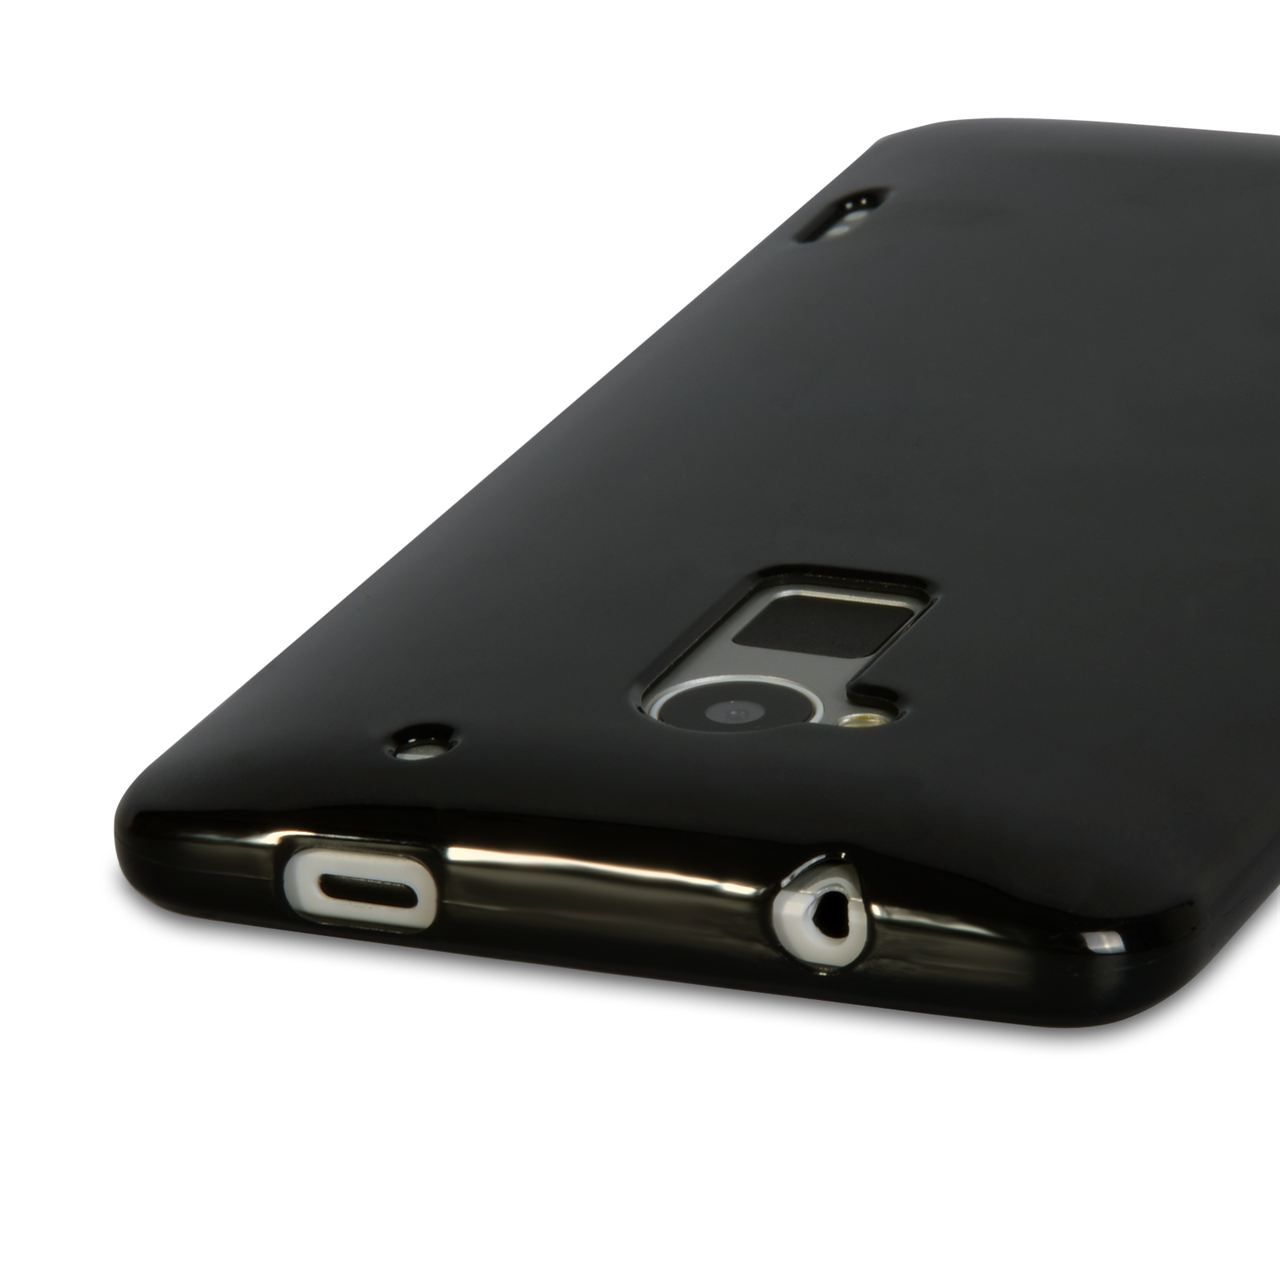 YouSave Accessories HTC One Max Gel Case - Black